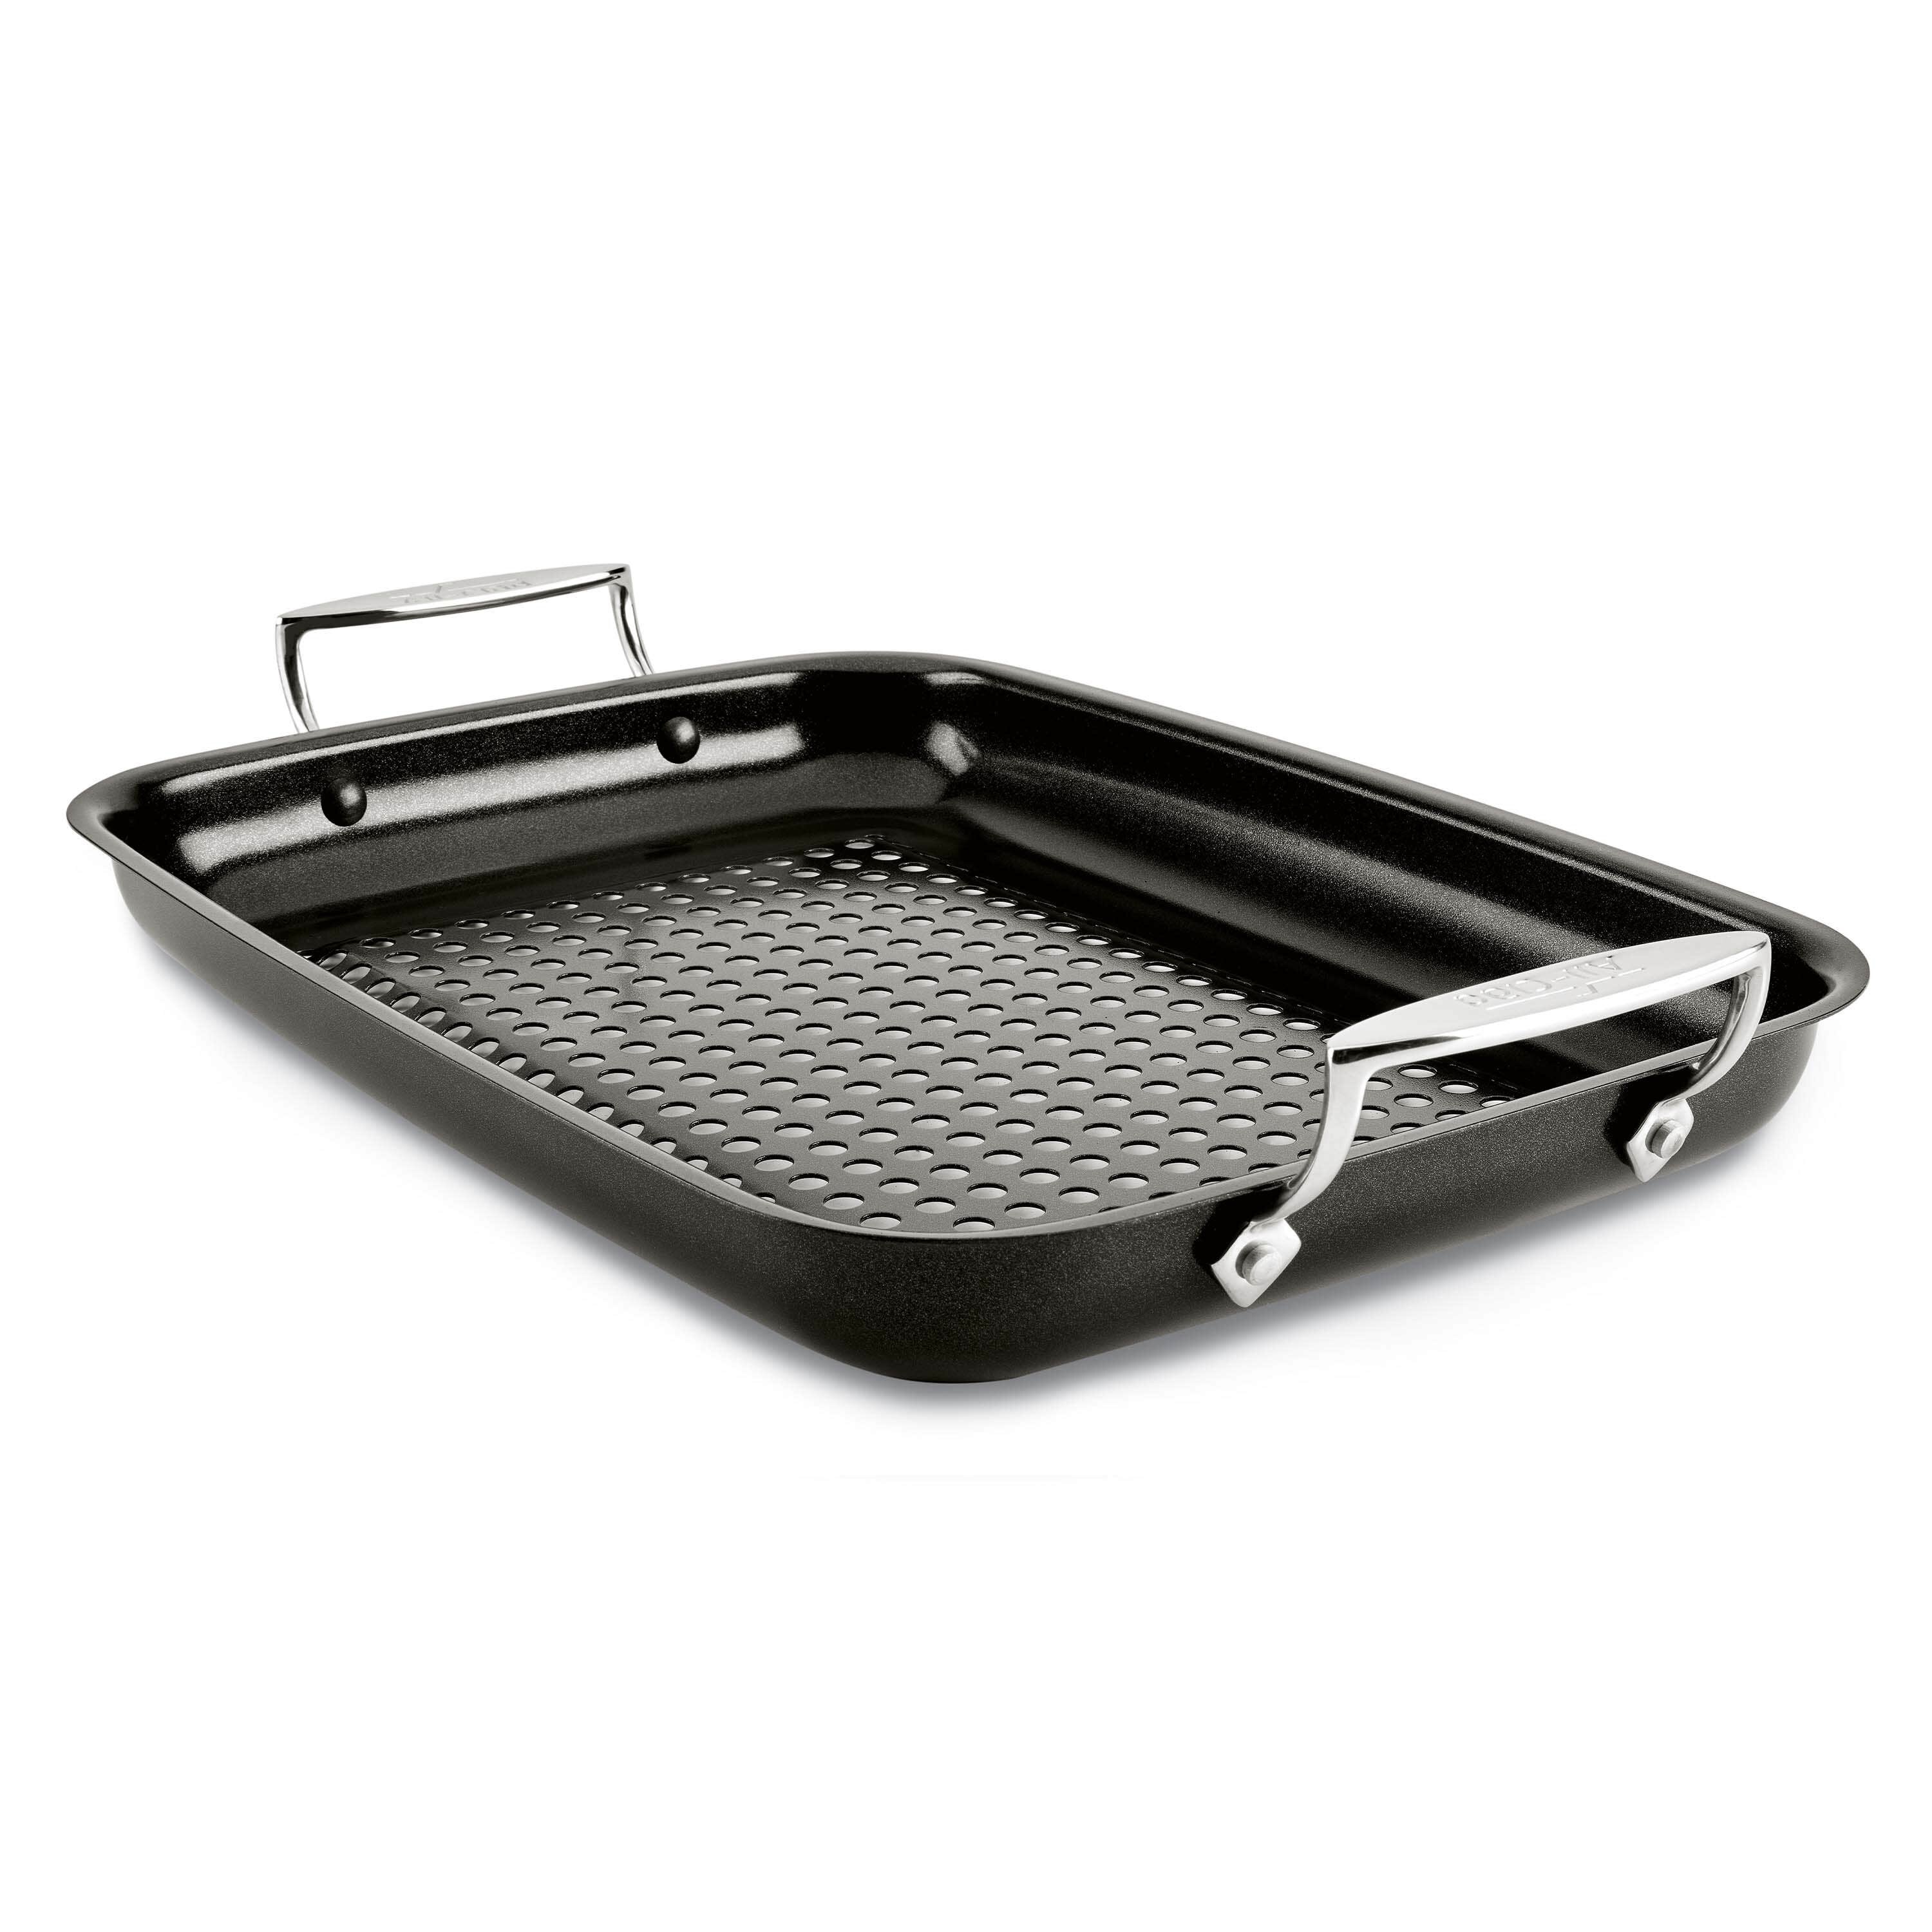 All-Clad Outdoor Roaster.16" x 12" x 1 1/2"  with All-clad Oven Mitts 